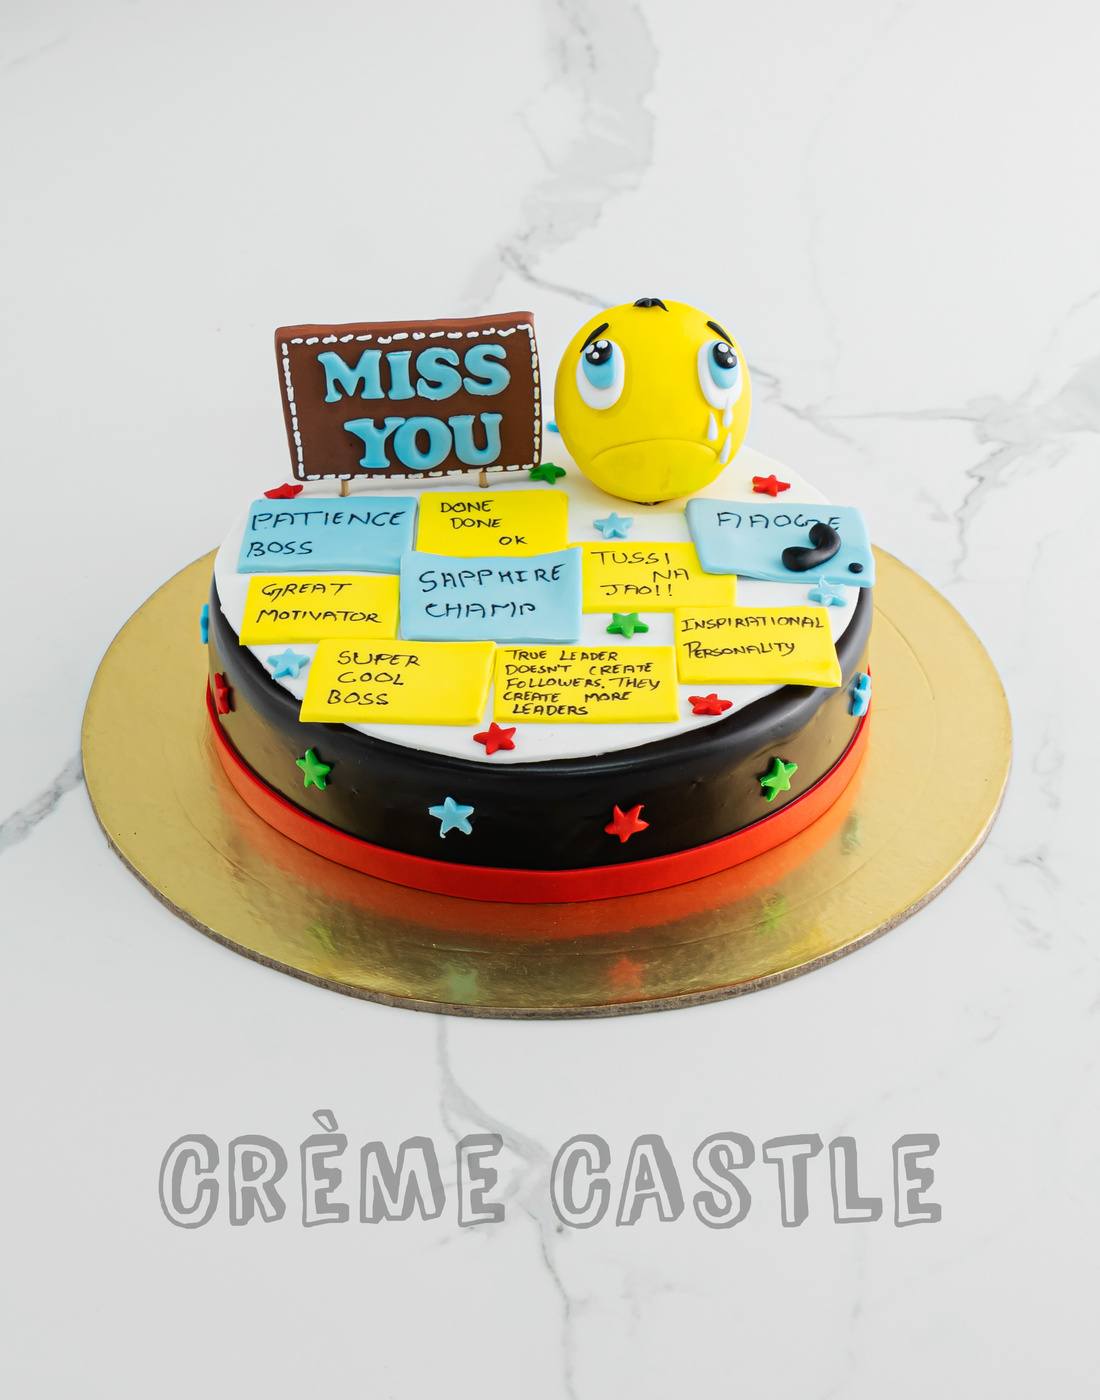 Farewell Cake with Miss you by Creme Castle